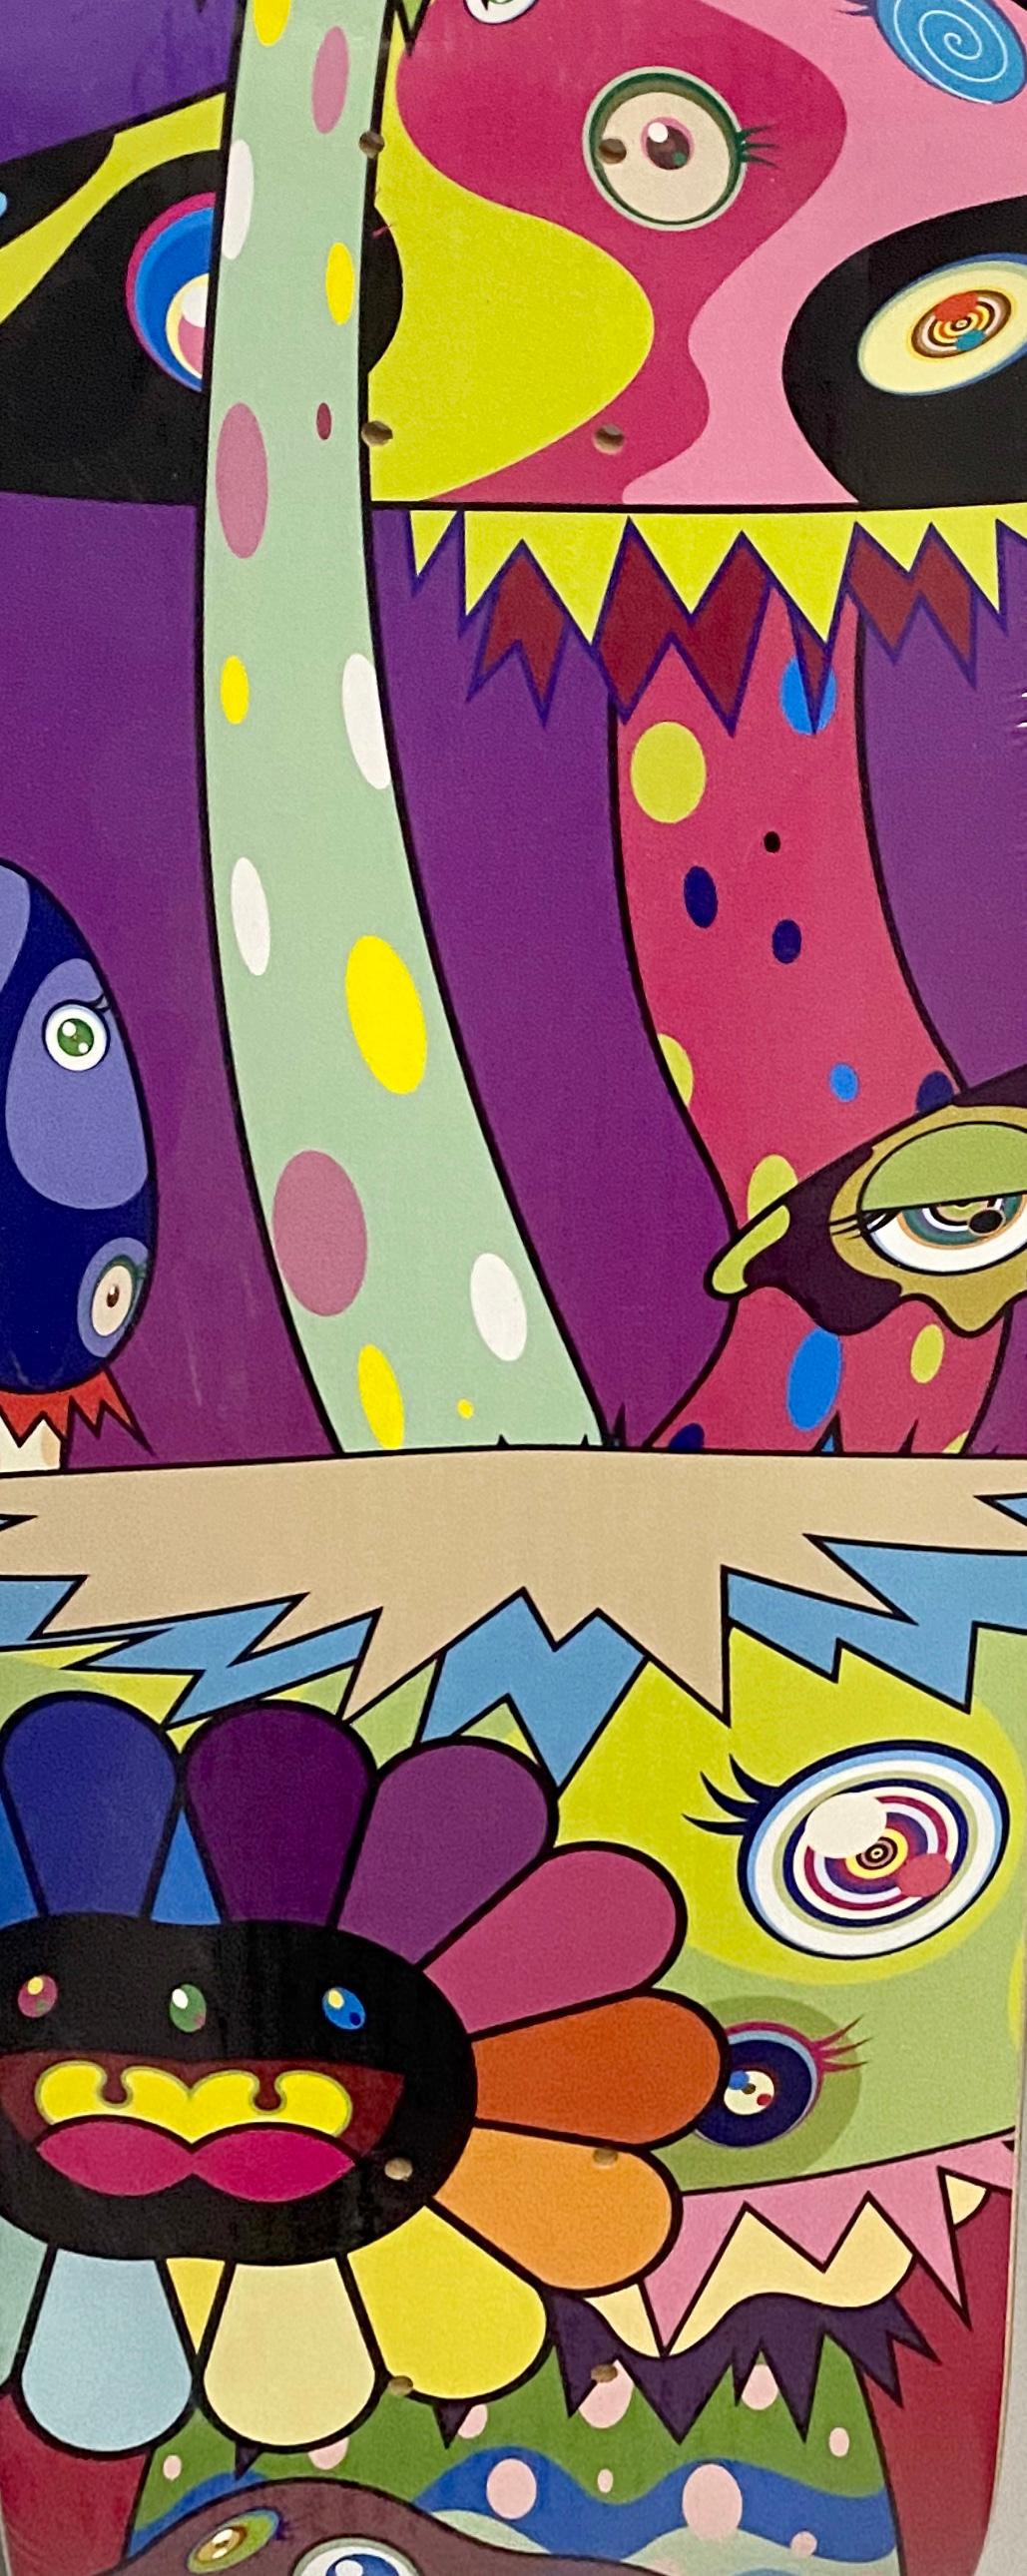 Takashi Murakami Skateboard Deck:
A vibrant piece of Takashi Murakami wall art produced as a completely sold out, limited series in 2019 in conjunction with Complexcon and Kaikai Kiki co. This deck is new in its original packaging. A brilliant piece